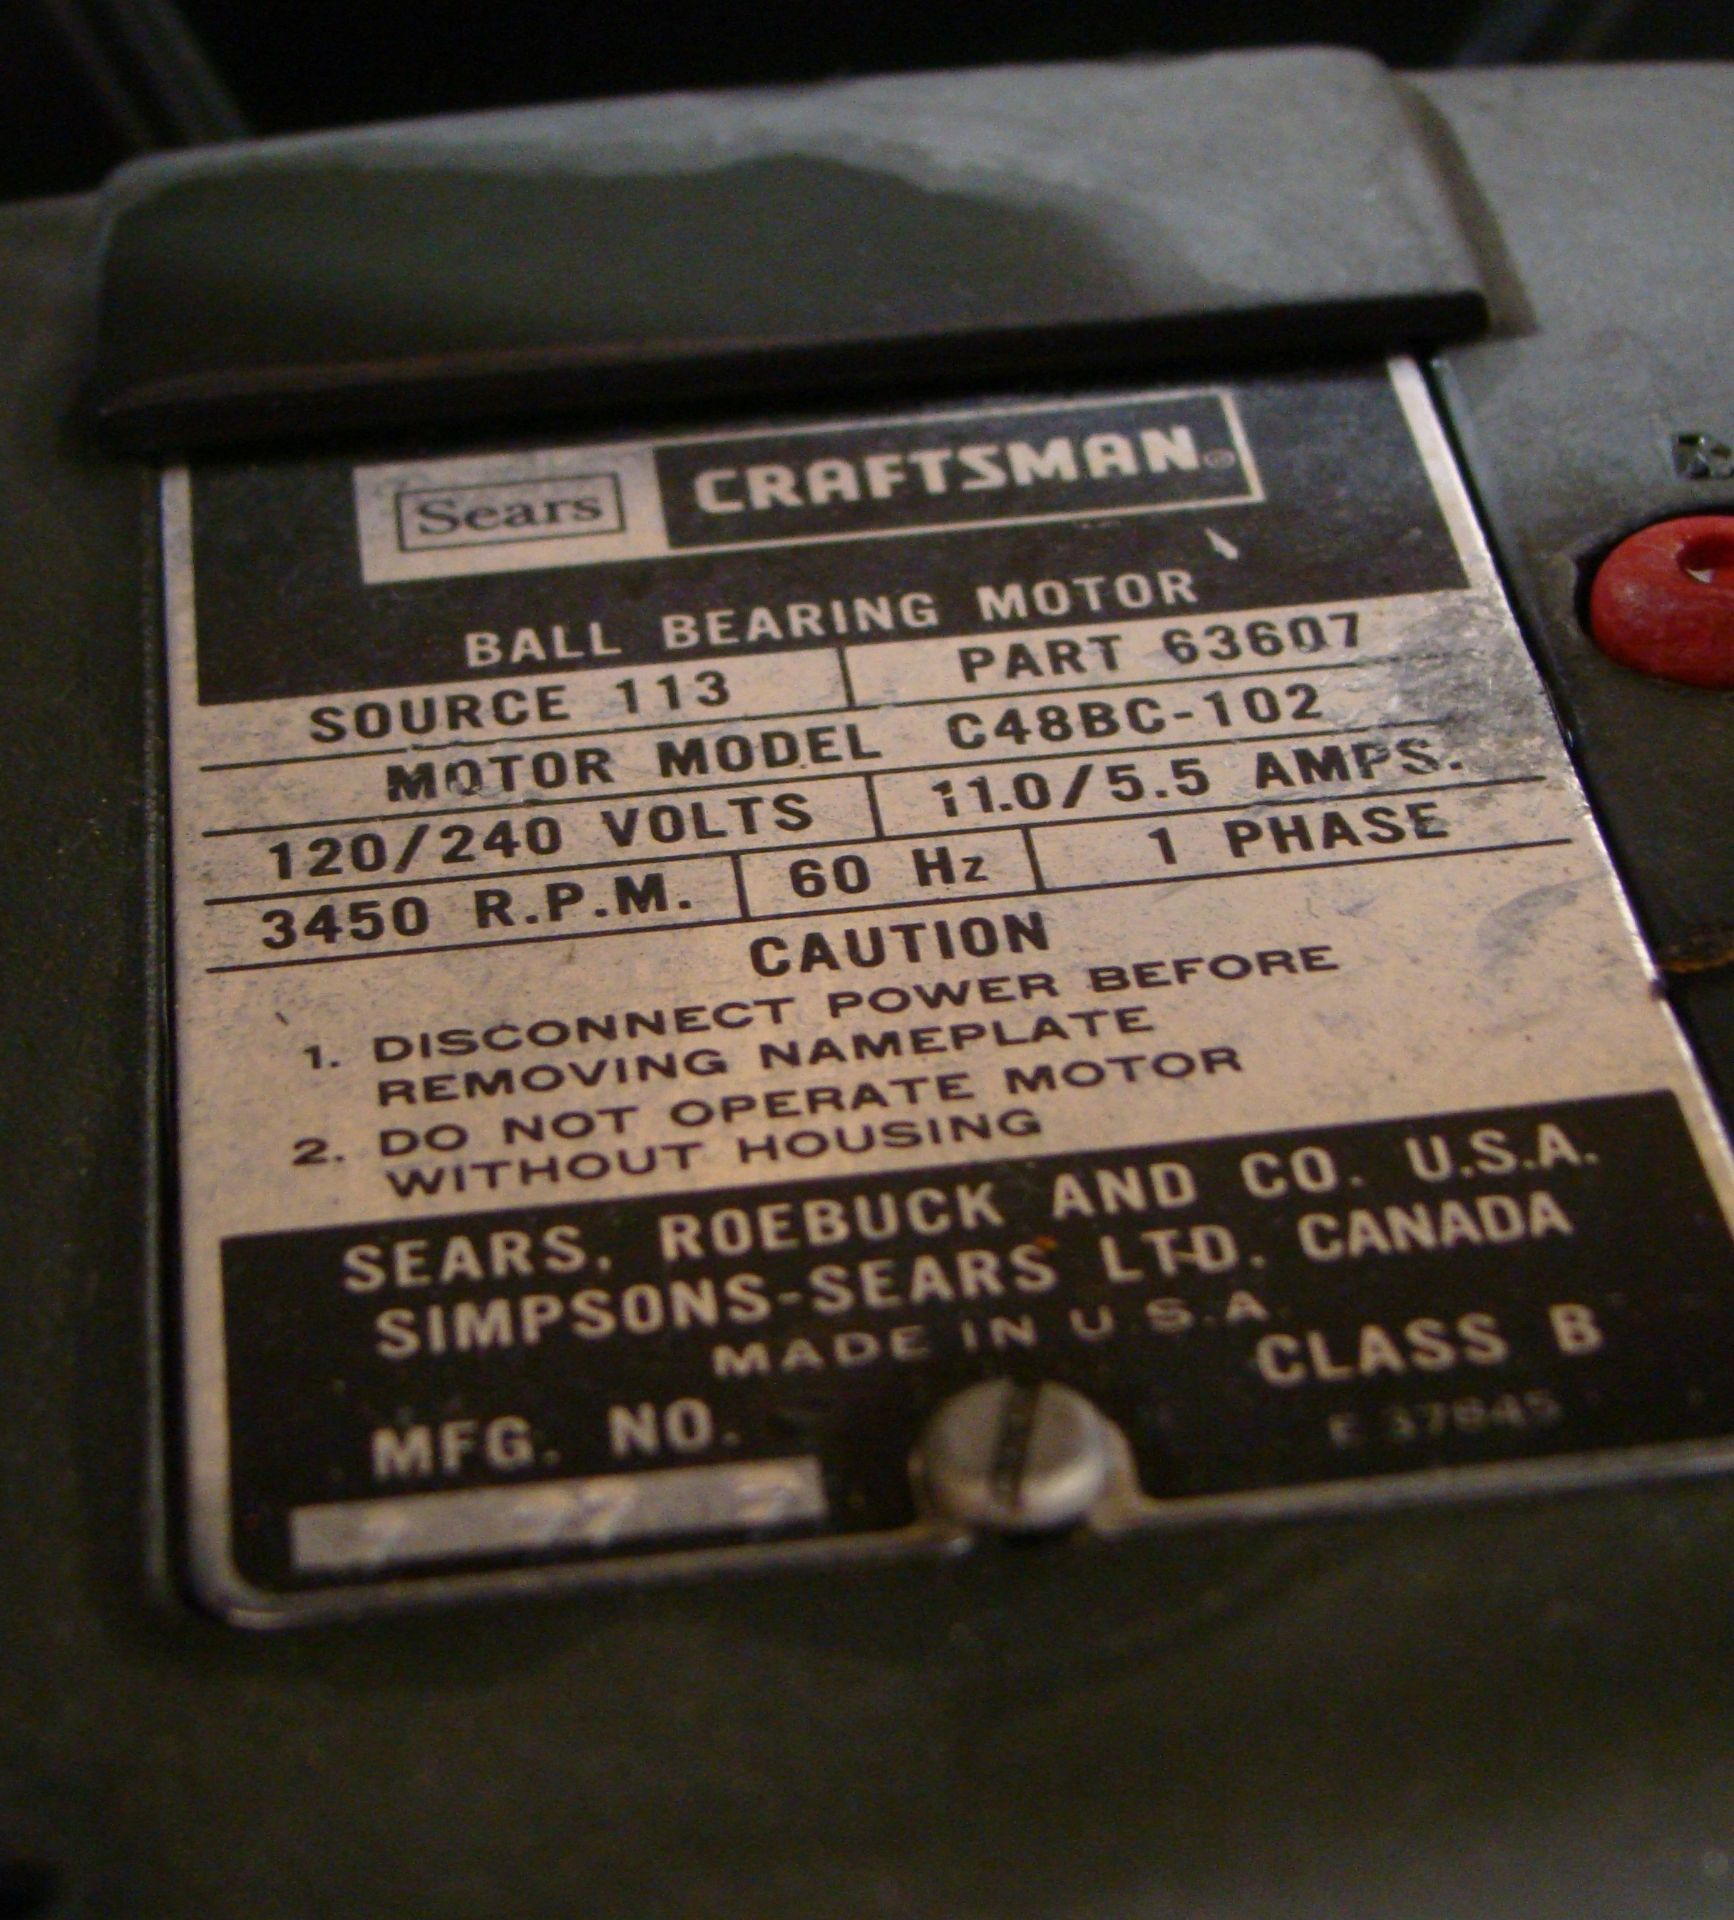 Sears Craftsman 10" Radial Arm Saw, 115 volt - Image 3 of 3